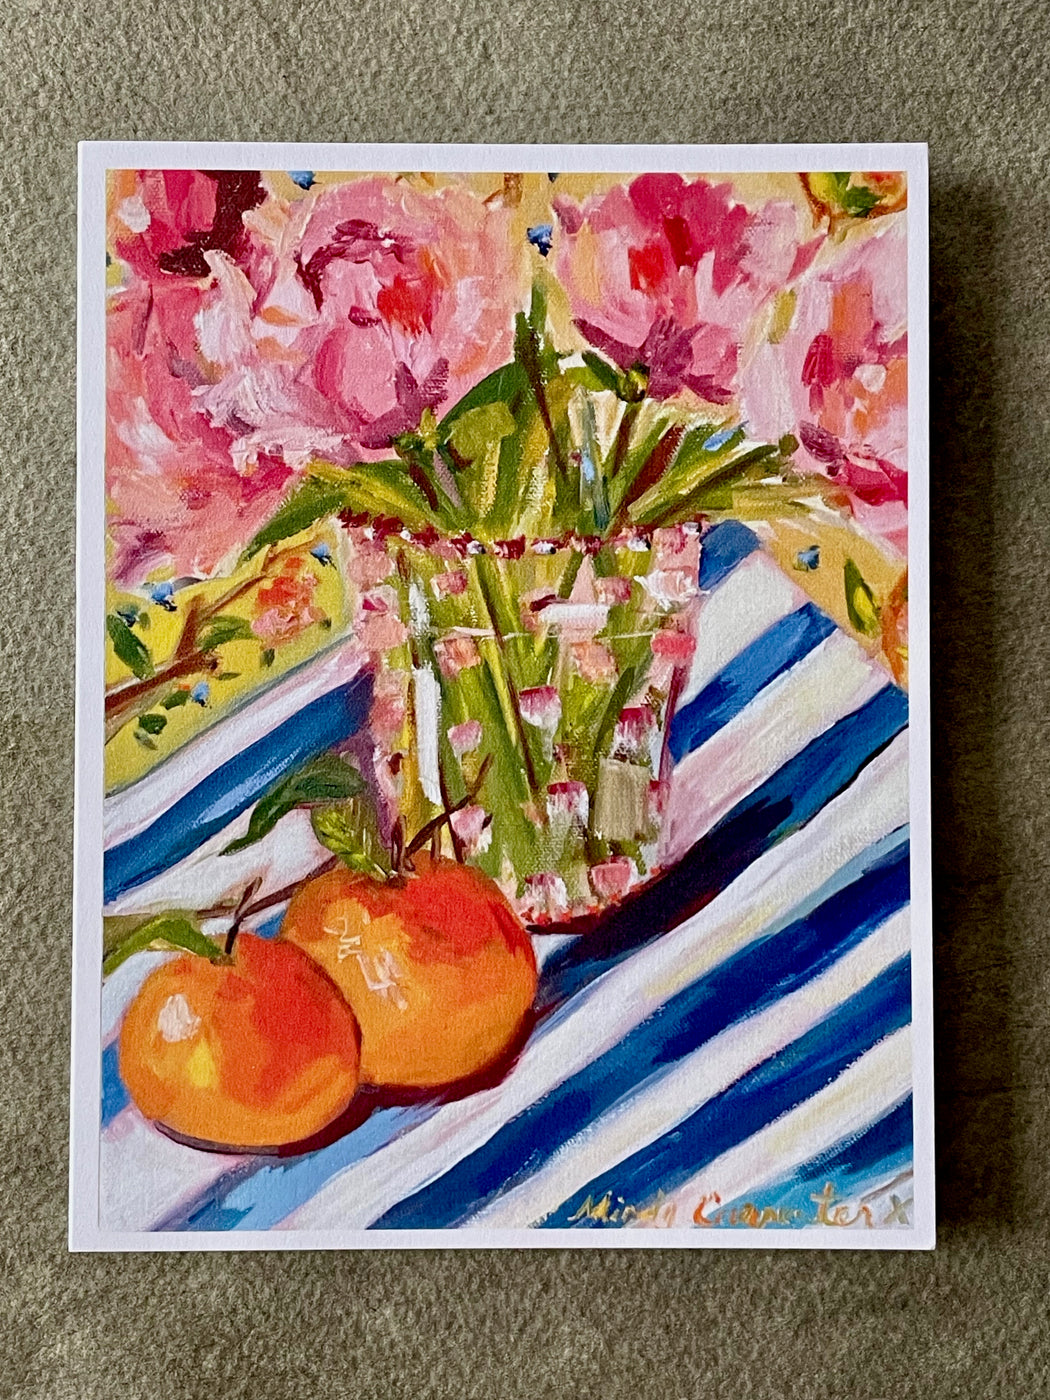 "Peonies and Oranges" Card by Mindy Carpenter